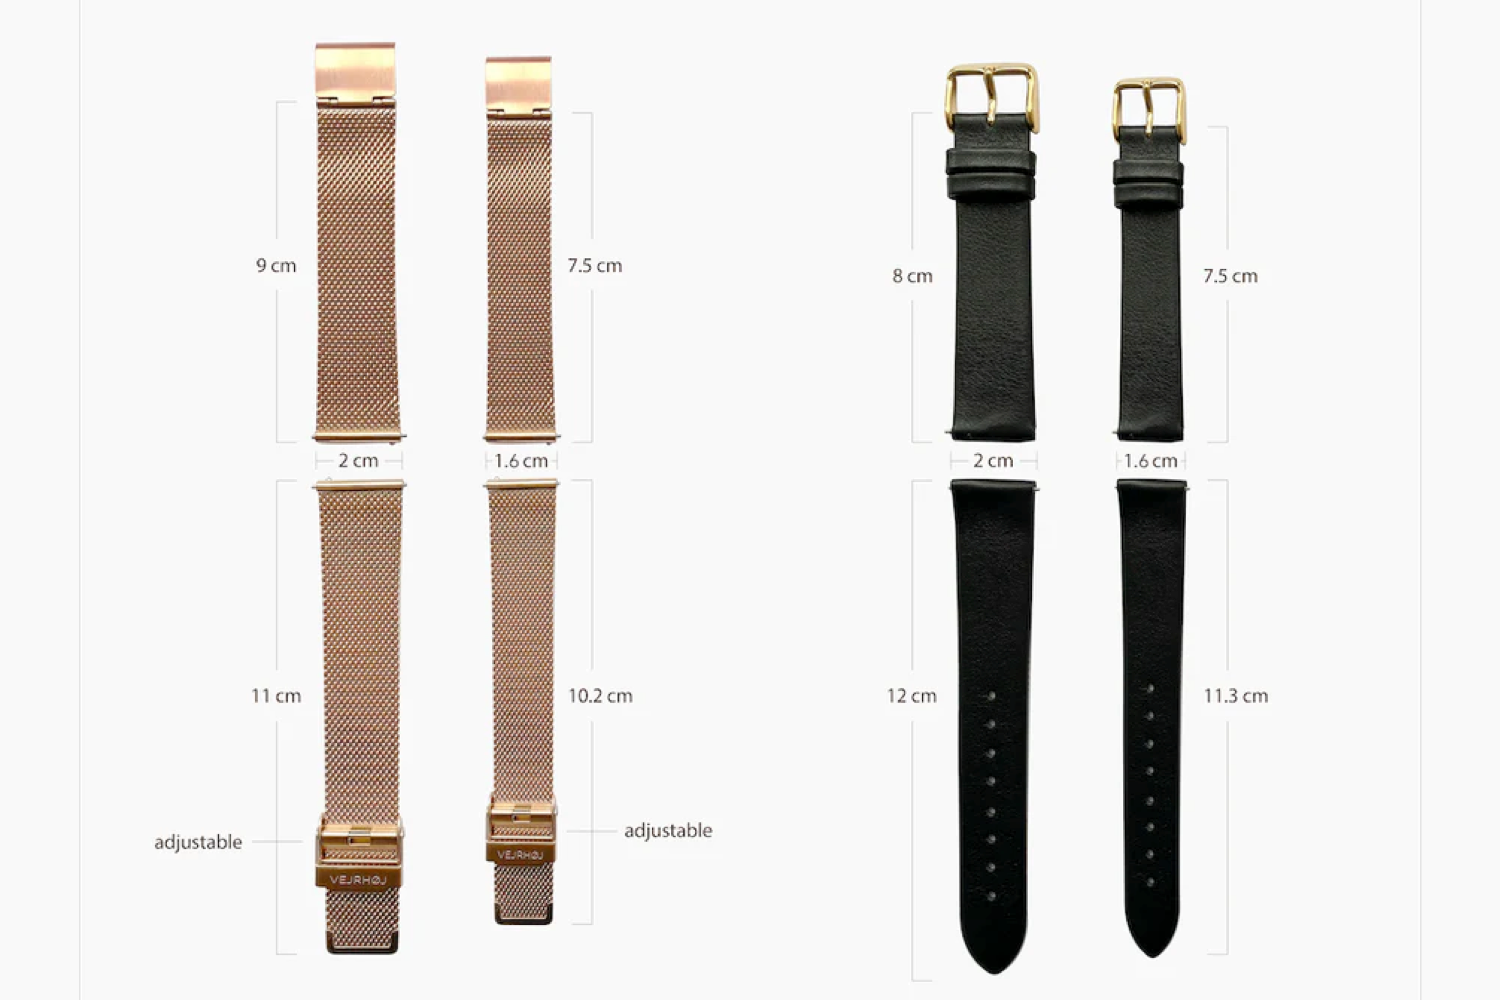 The lengths and width of our straps